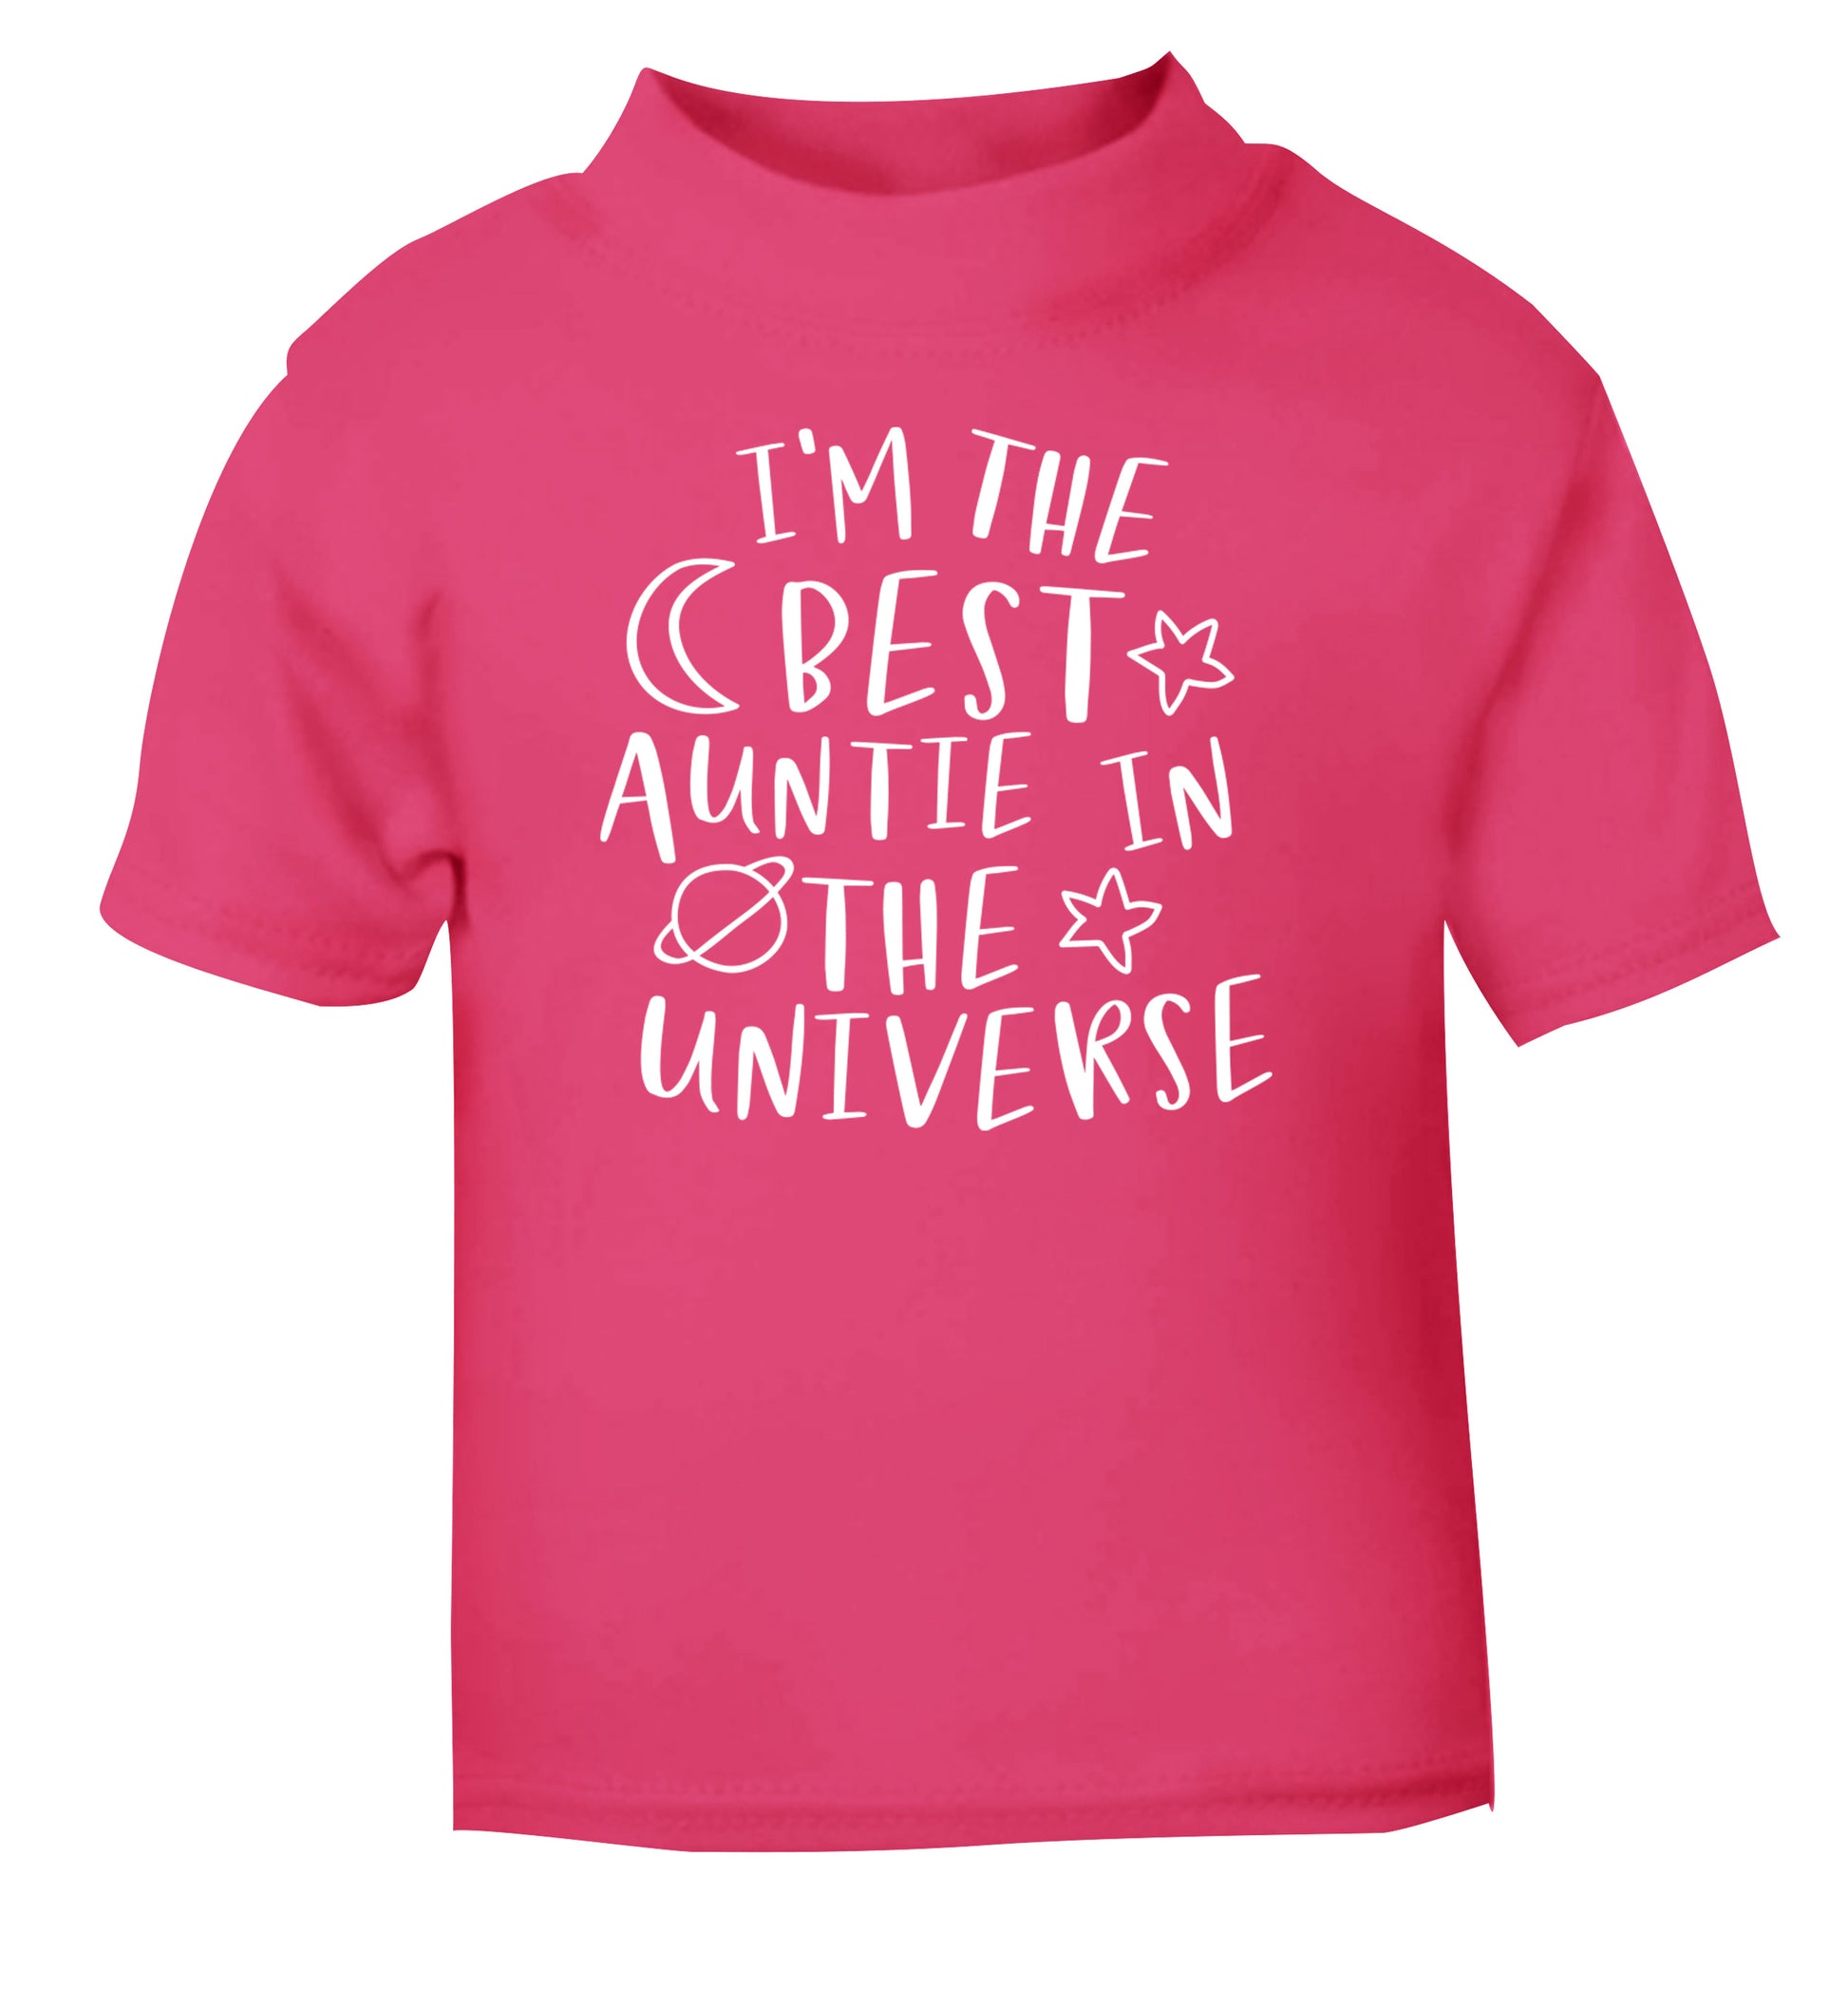 I'm the best auntie in the universe pink Baby Toddler Tshirt 2 Years